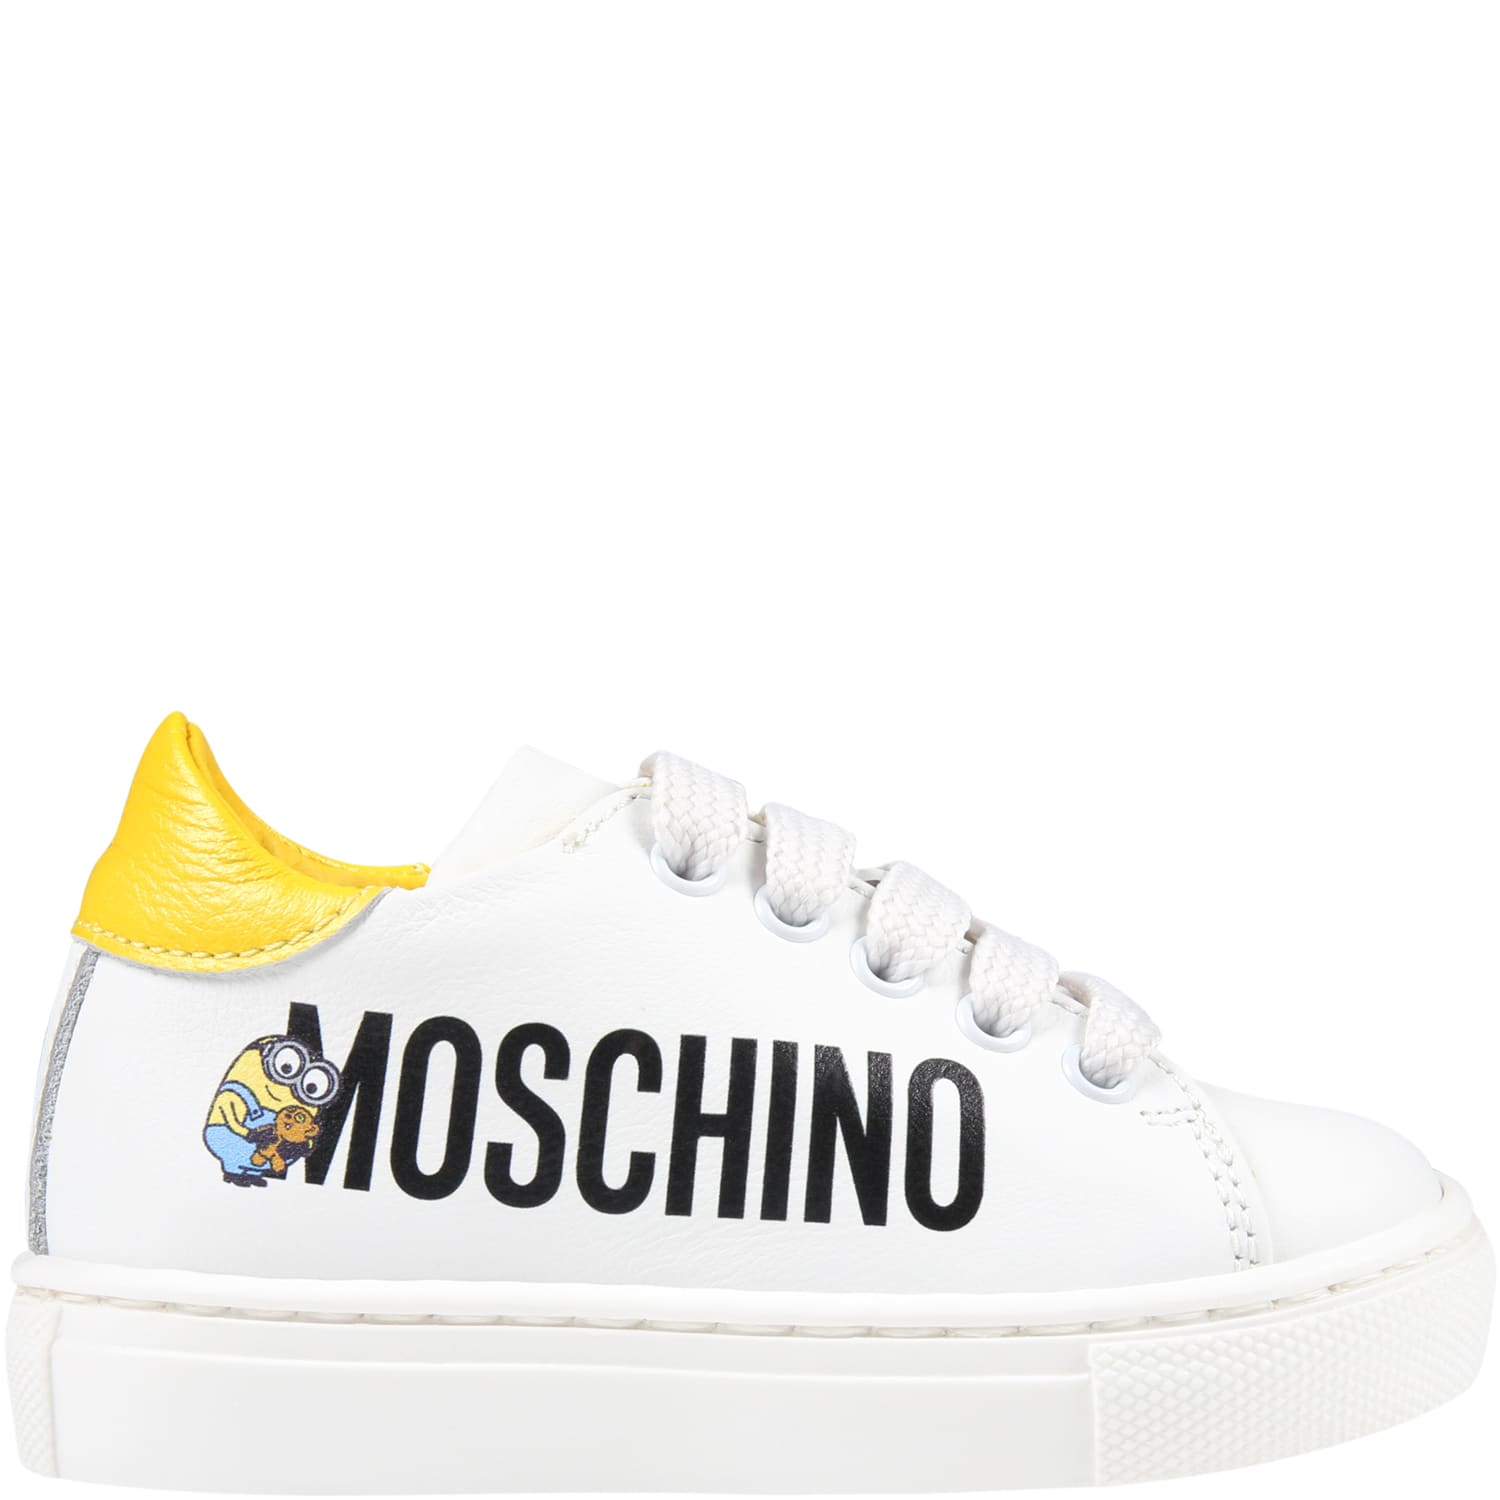 Moschino White Sneakers For Kids With Minions And Black Logo